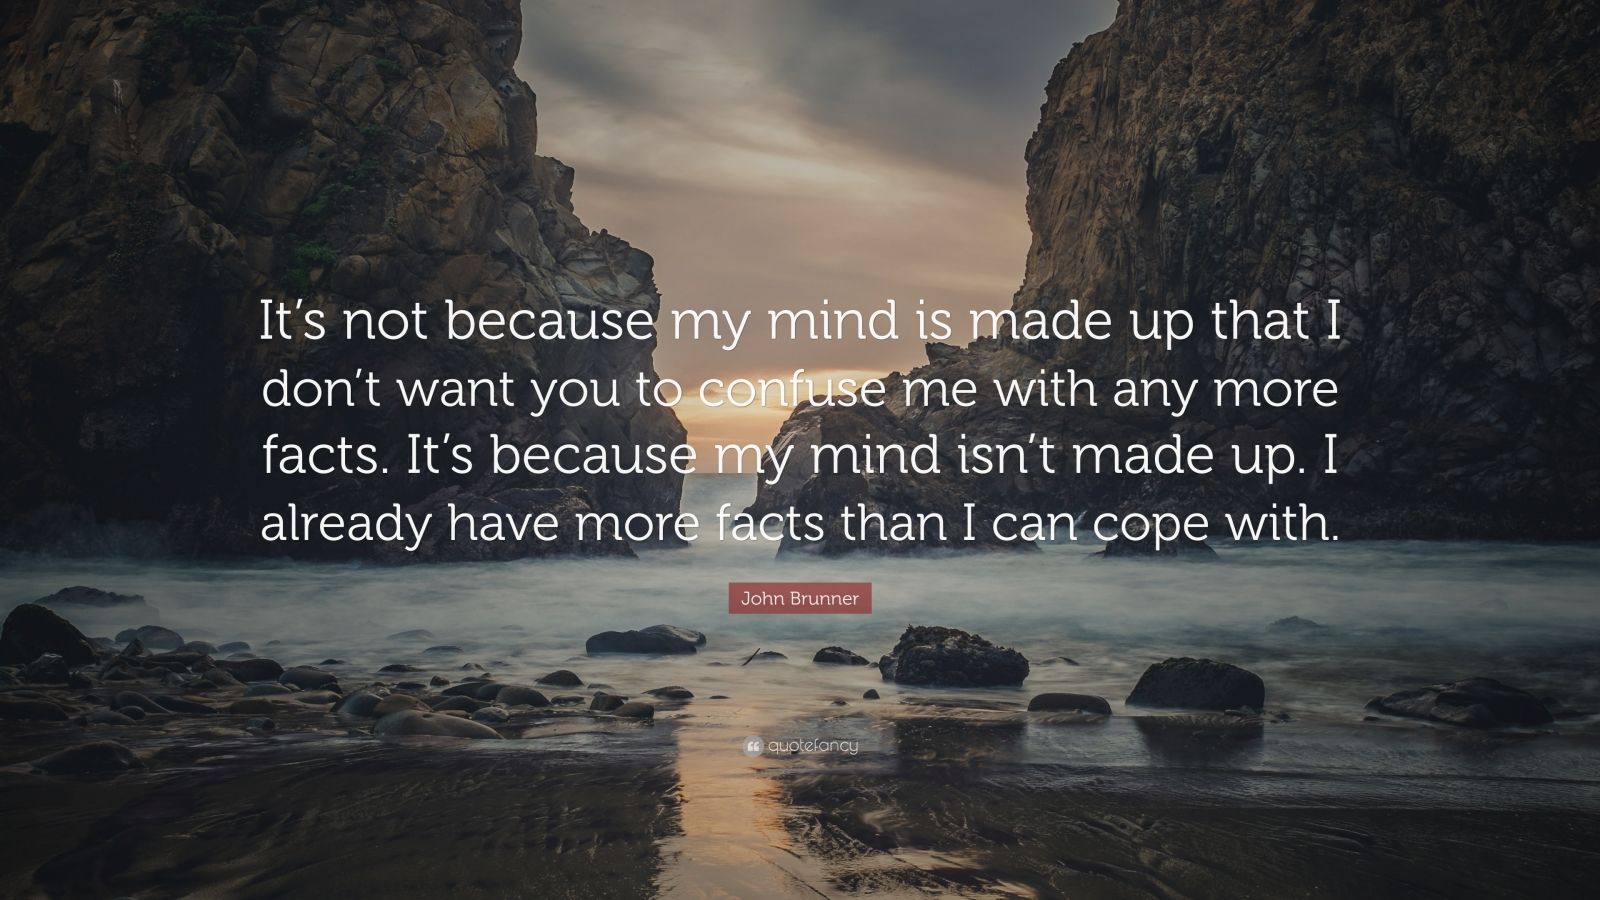 John Brunner Quote: “It’s not because my mind is made up that I don’t ...